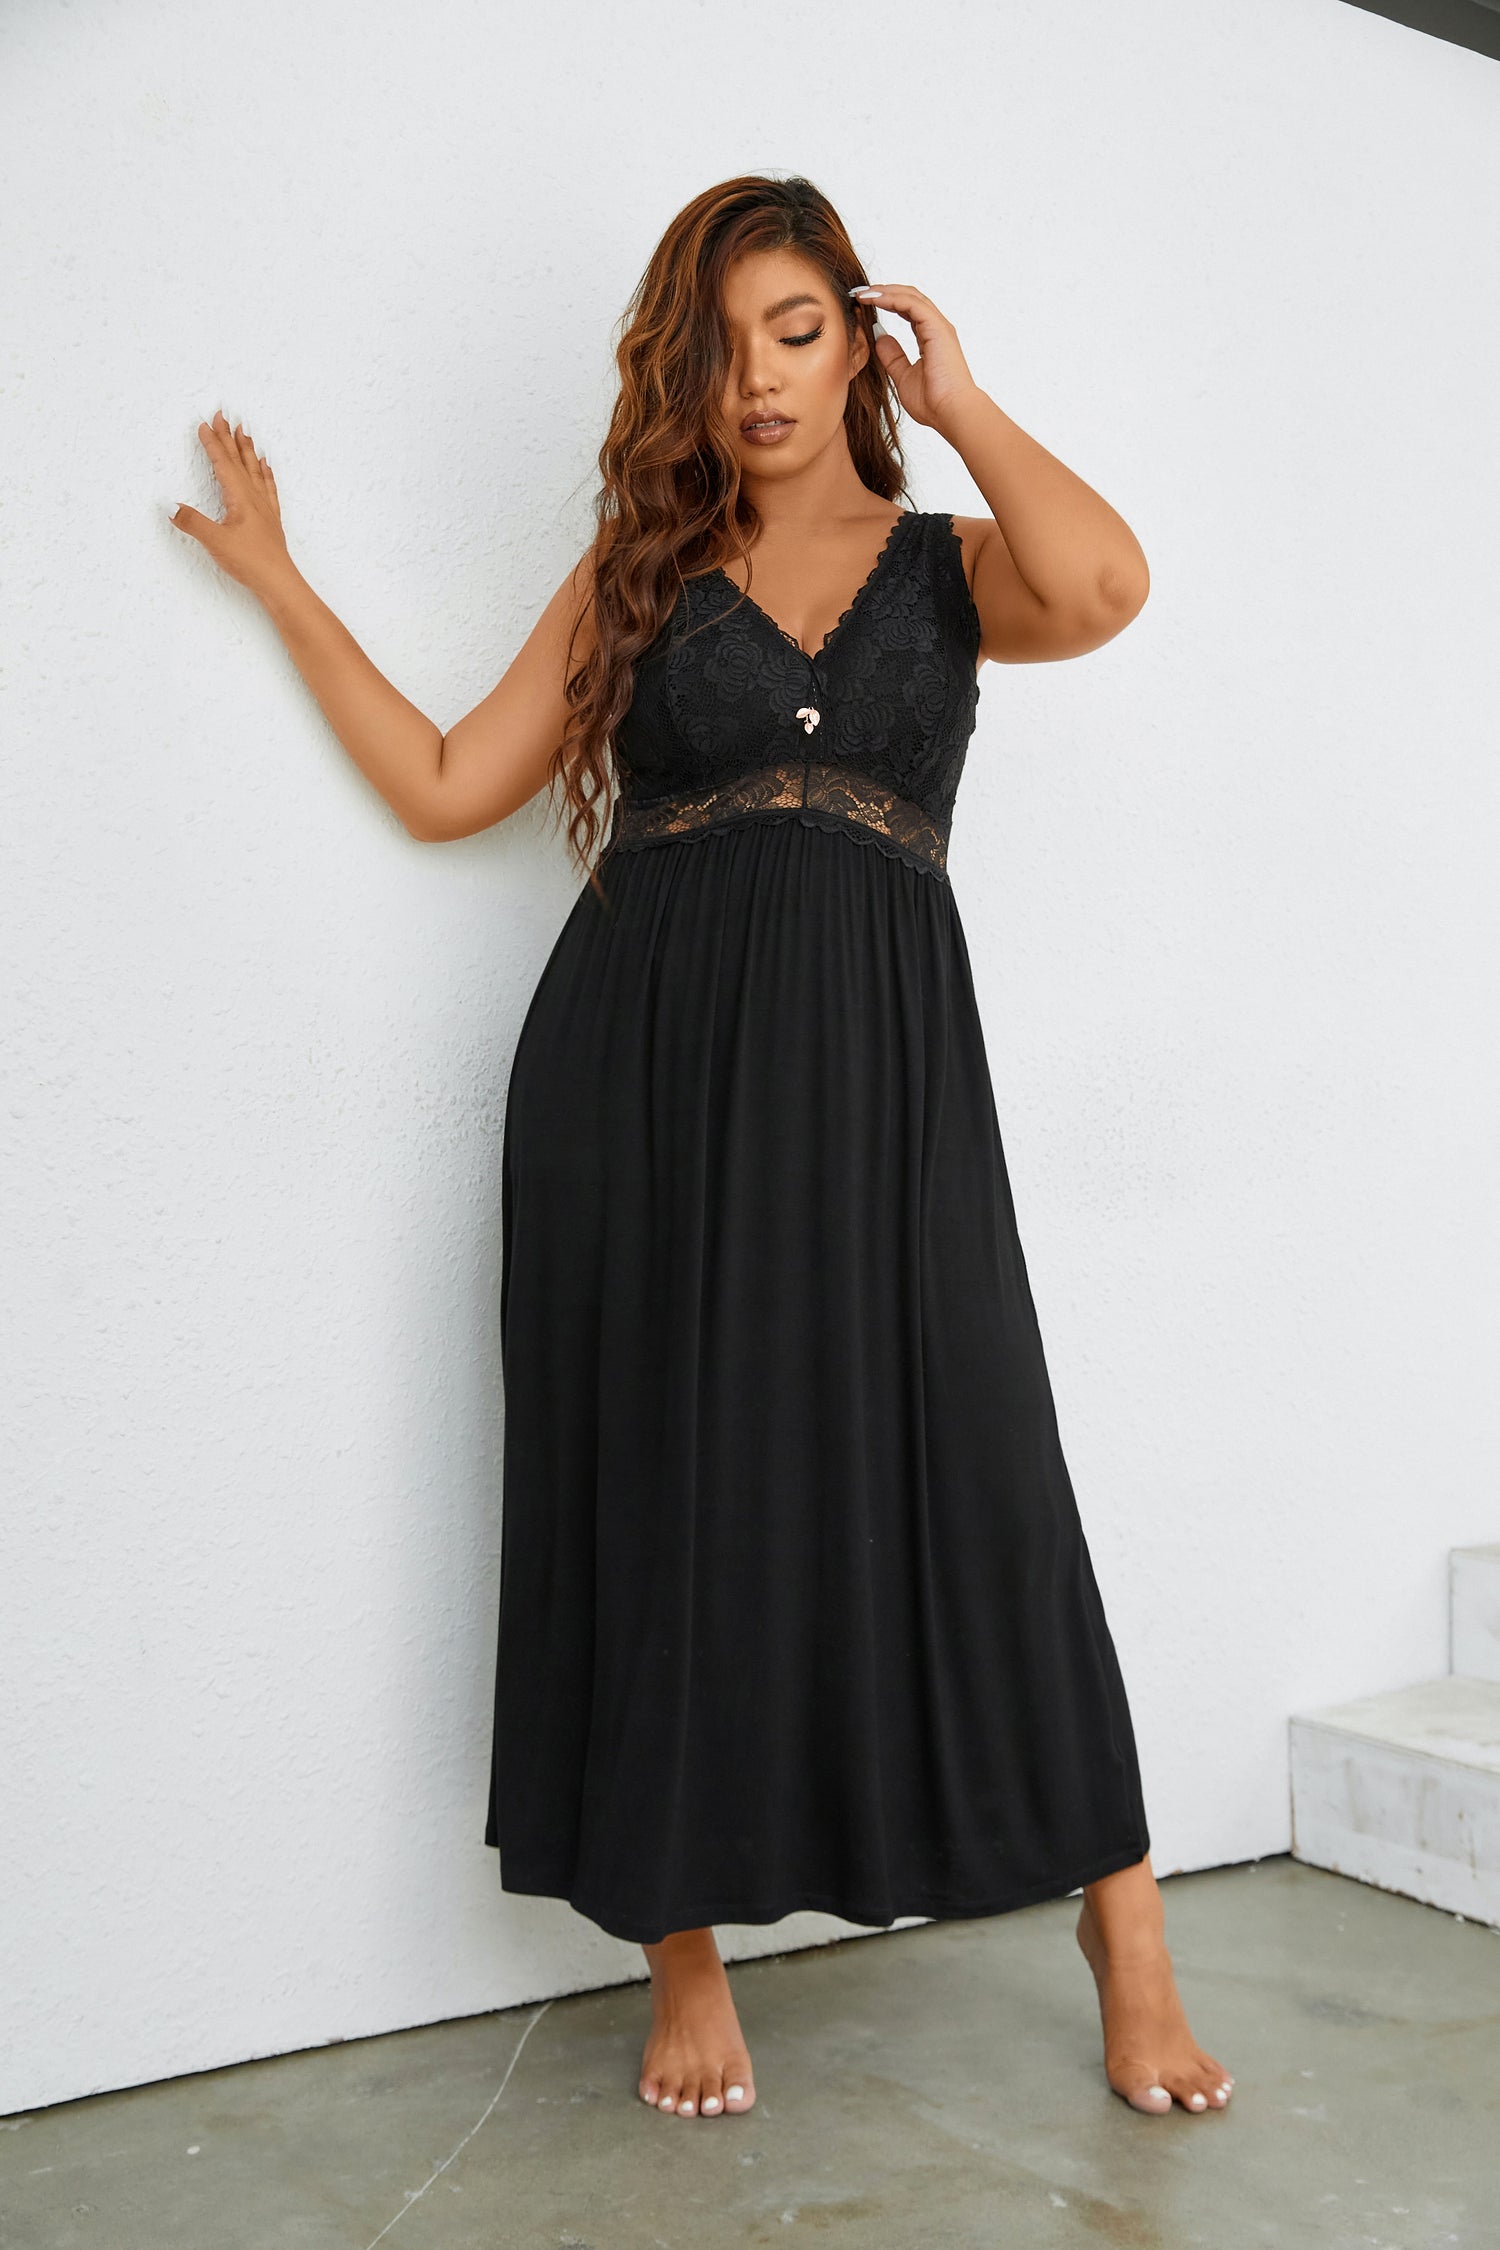 Sexy Lace Jersey Elegant Long Nightgown Chemises Black